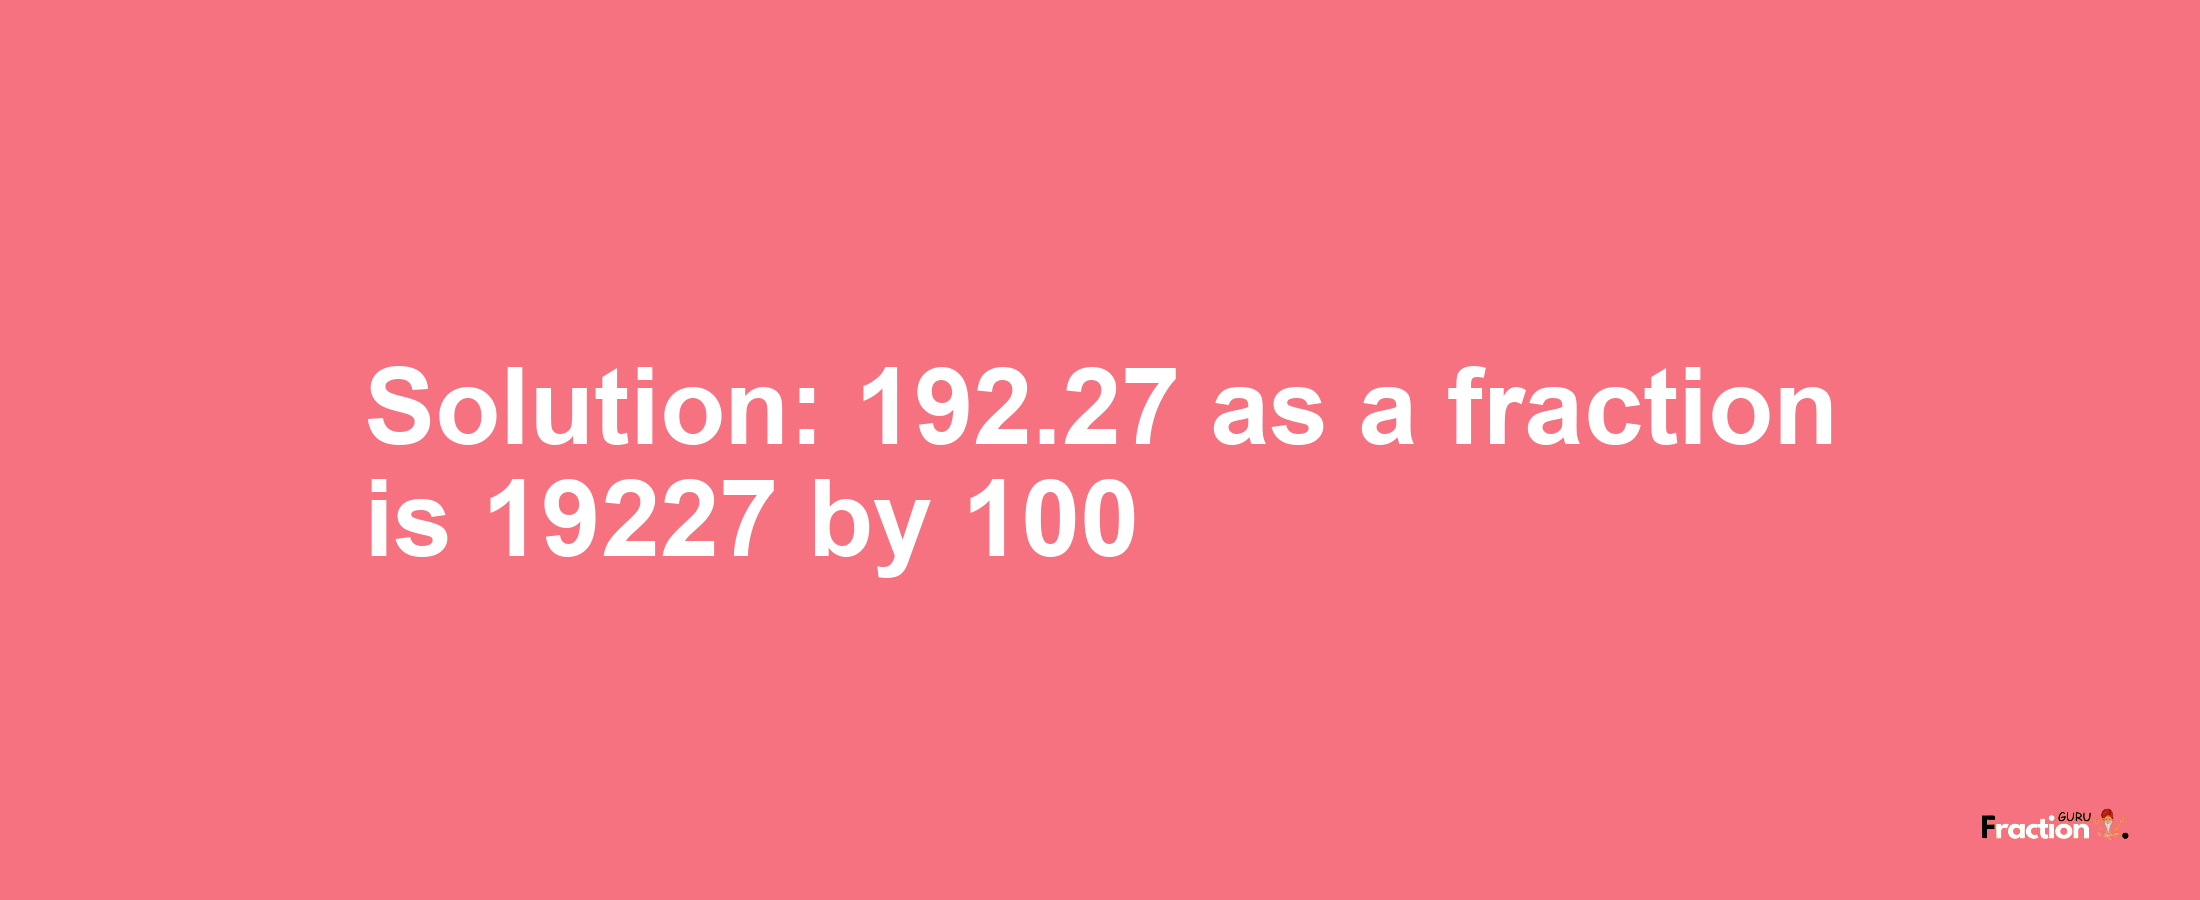 Solution:192.27 as a fraction is 19227/100